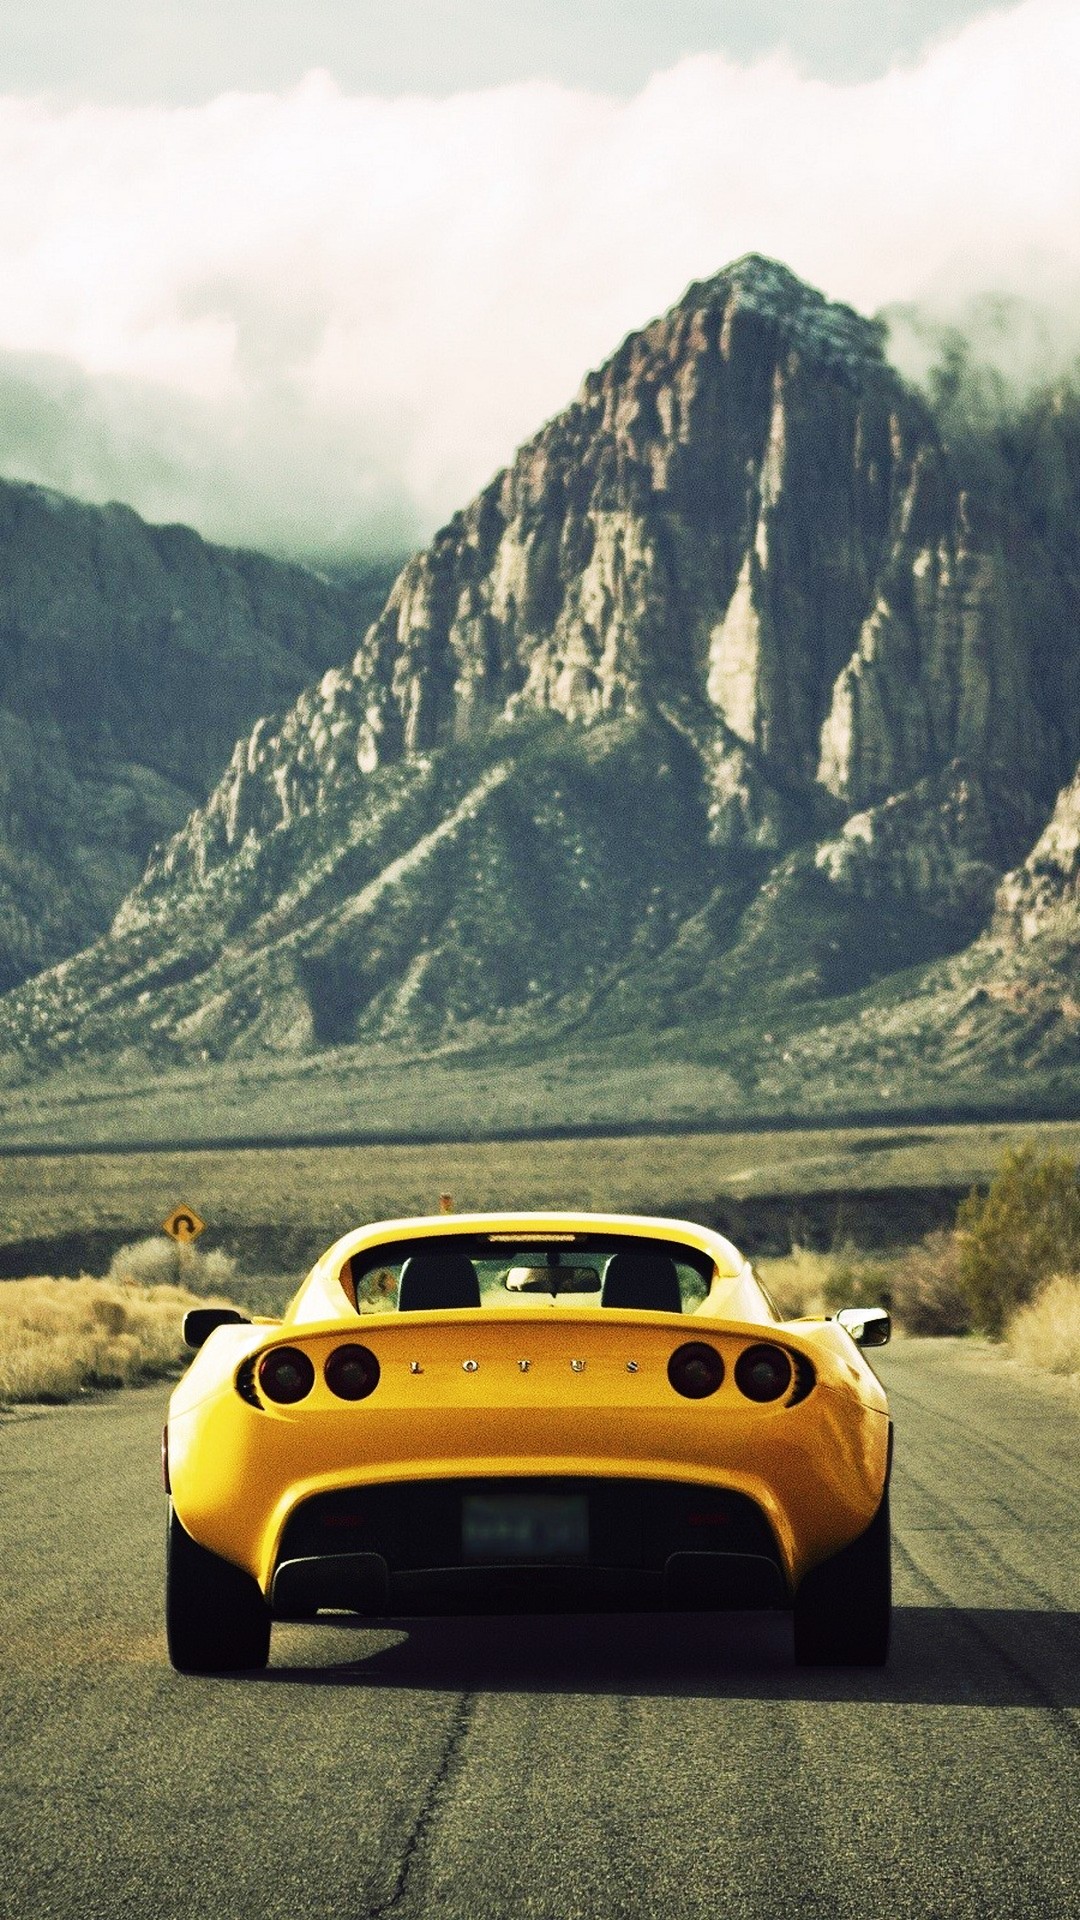 Car Wallpaper Android with high-resolution 1080x1920 pixel. You can use this wallpaper for your Android backgrounds, Tablet, Samsung Screensavers, Mobile Phone Lock Screen and another Smartphones device